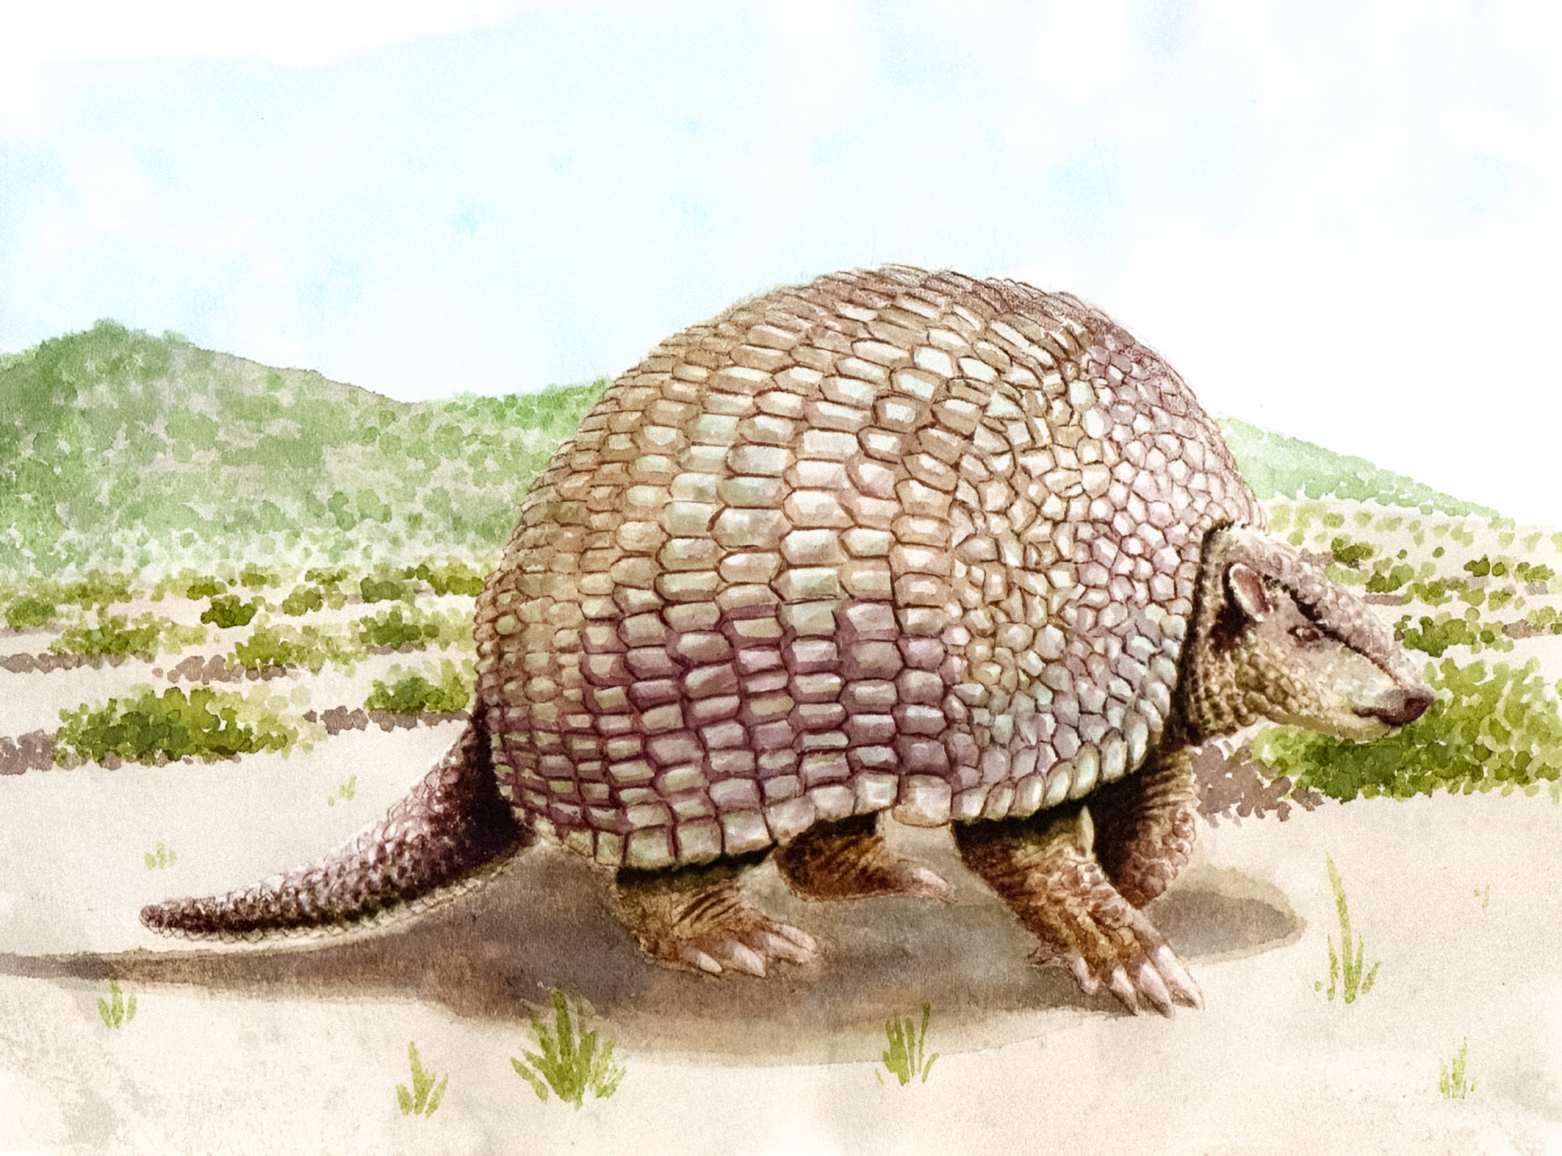 Early American humans used to hunt giant armadillos and live inside their shells 4